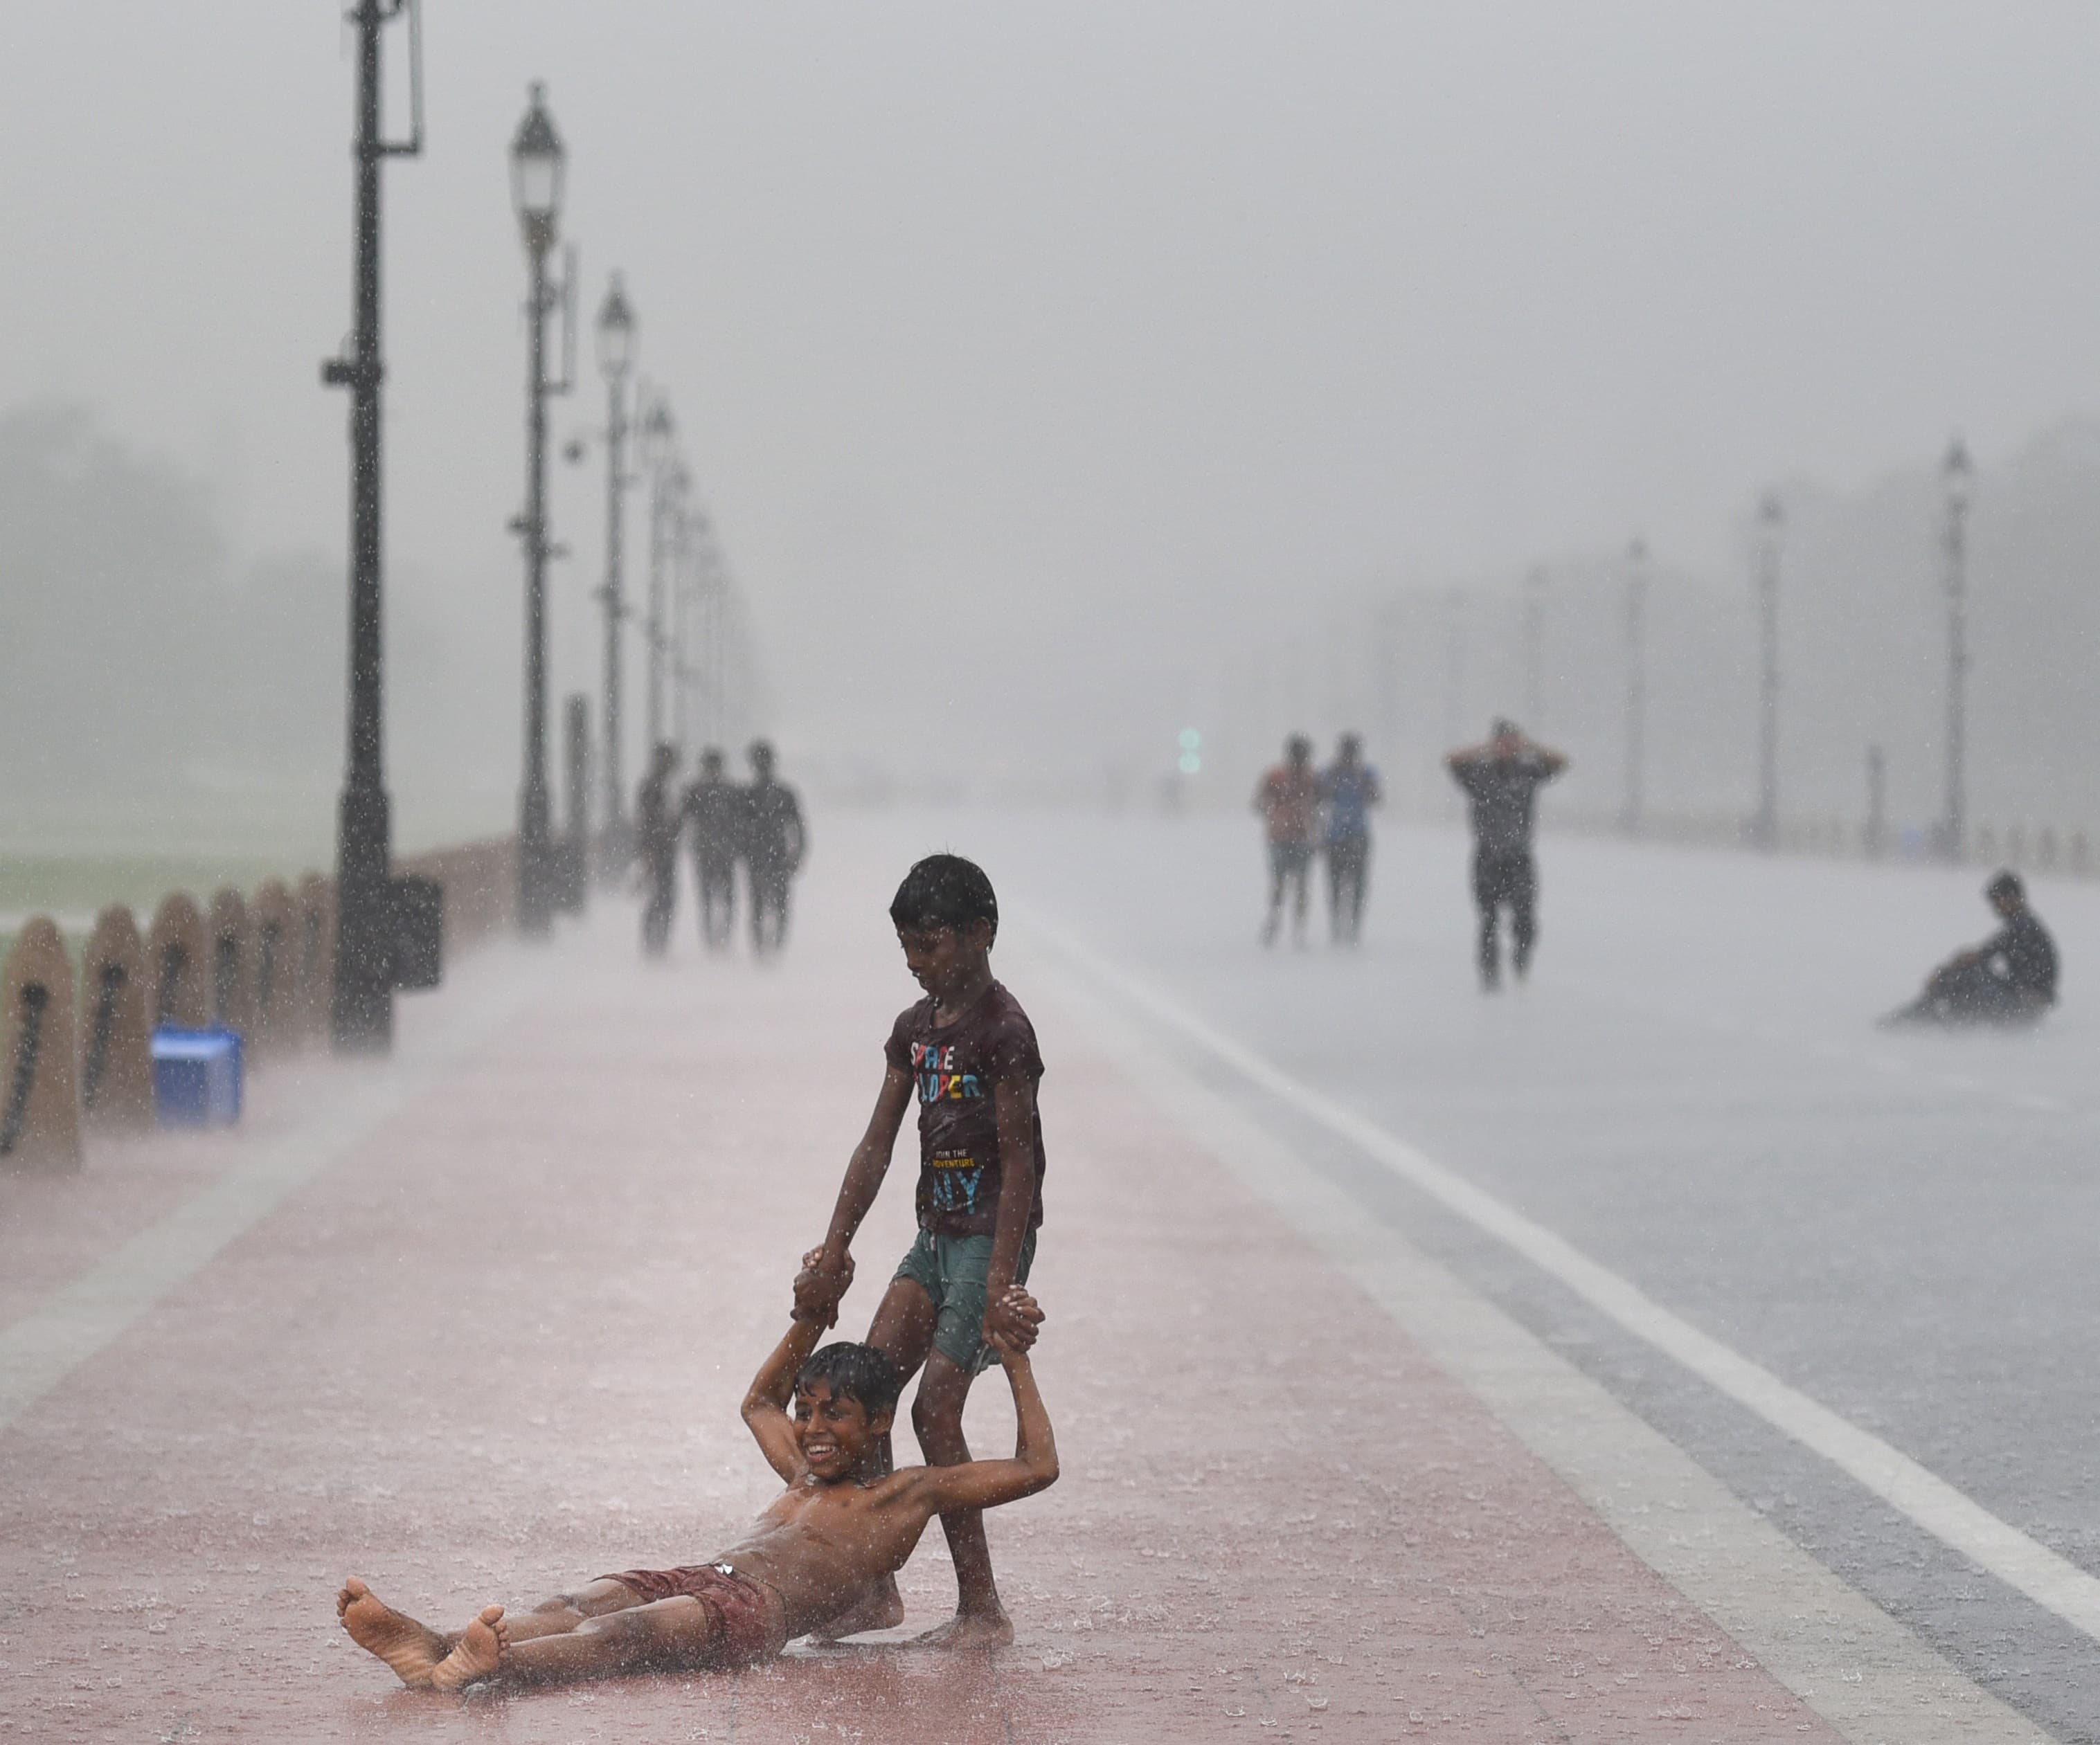 Delhi Weather Update: IMD Predicts Cloudy Day With Light Rain